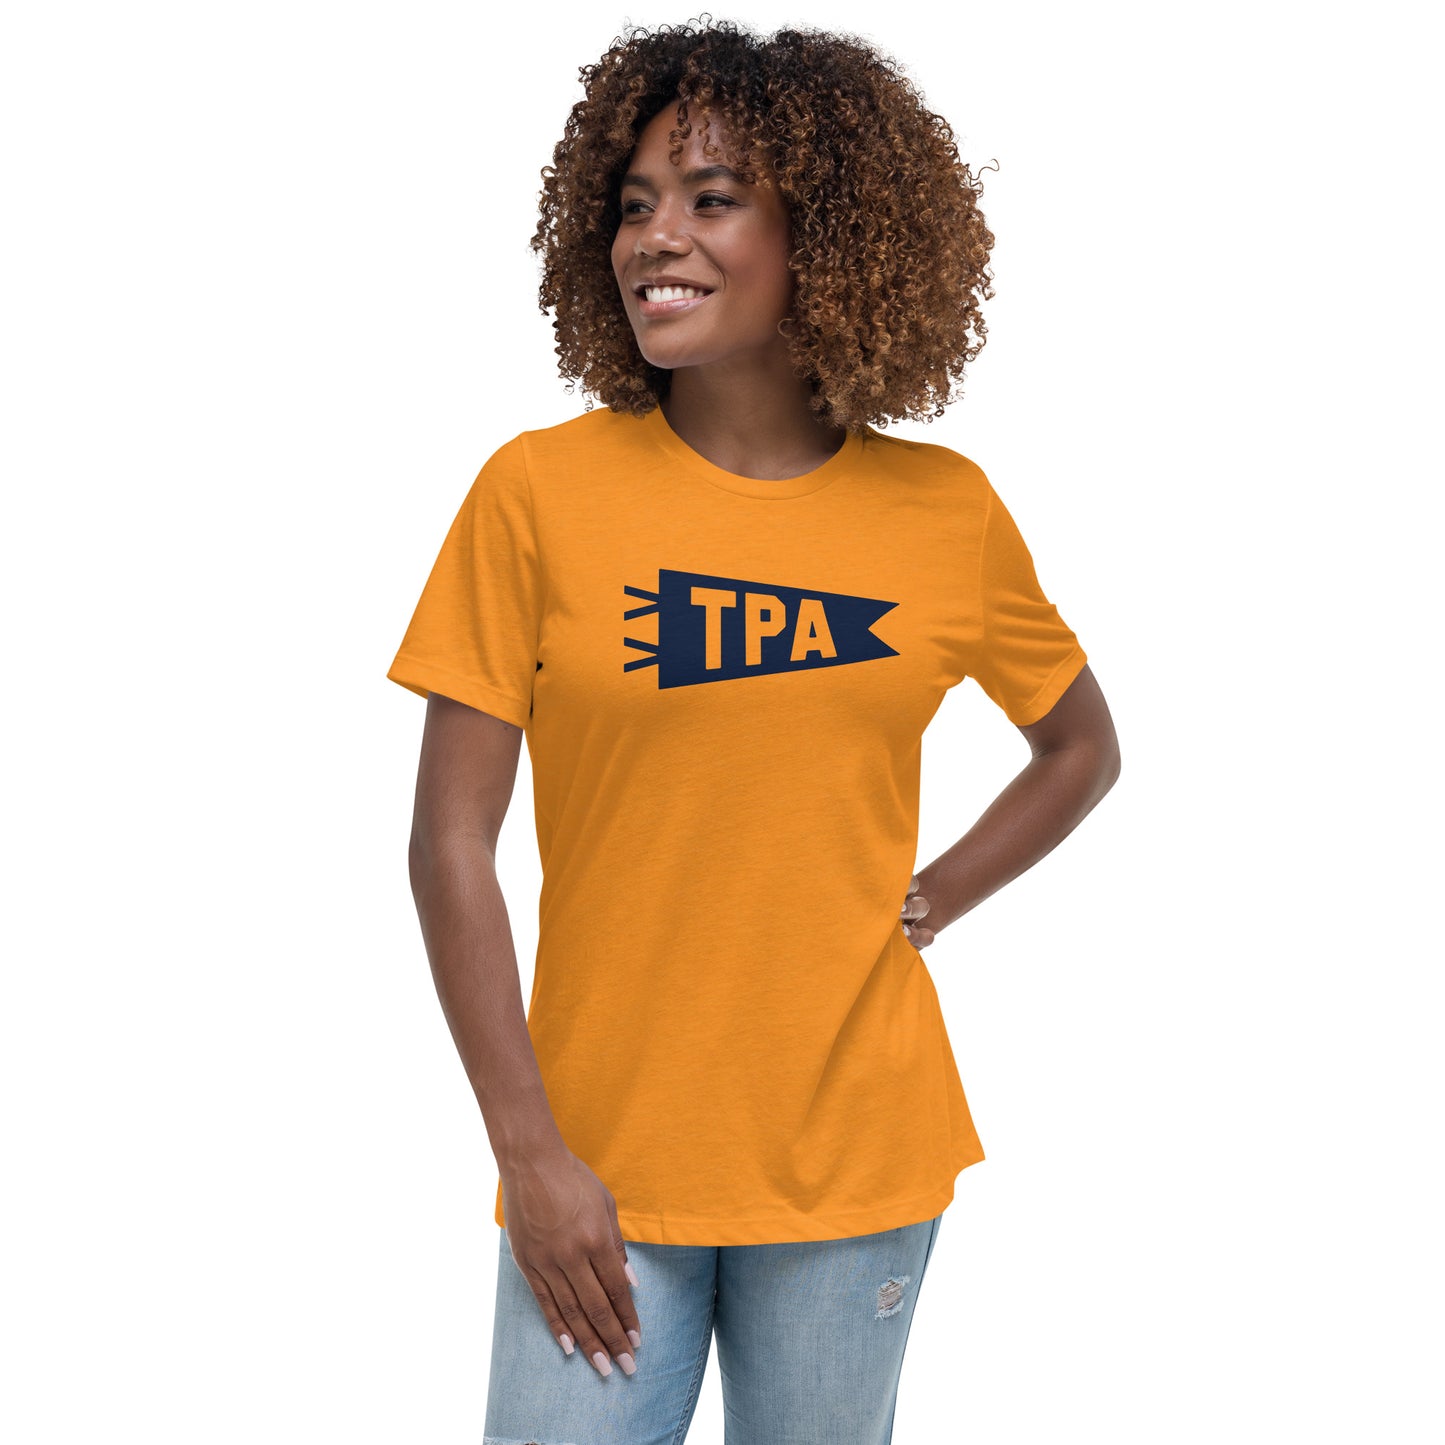 Airport Code Women's Tee - Navy Blue Graphic • TPA Tampa • YHM Designs - Image 03